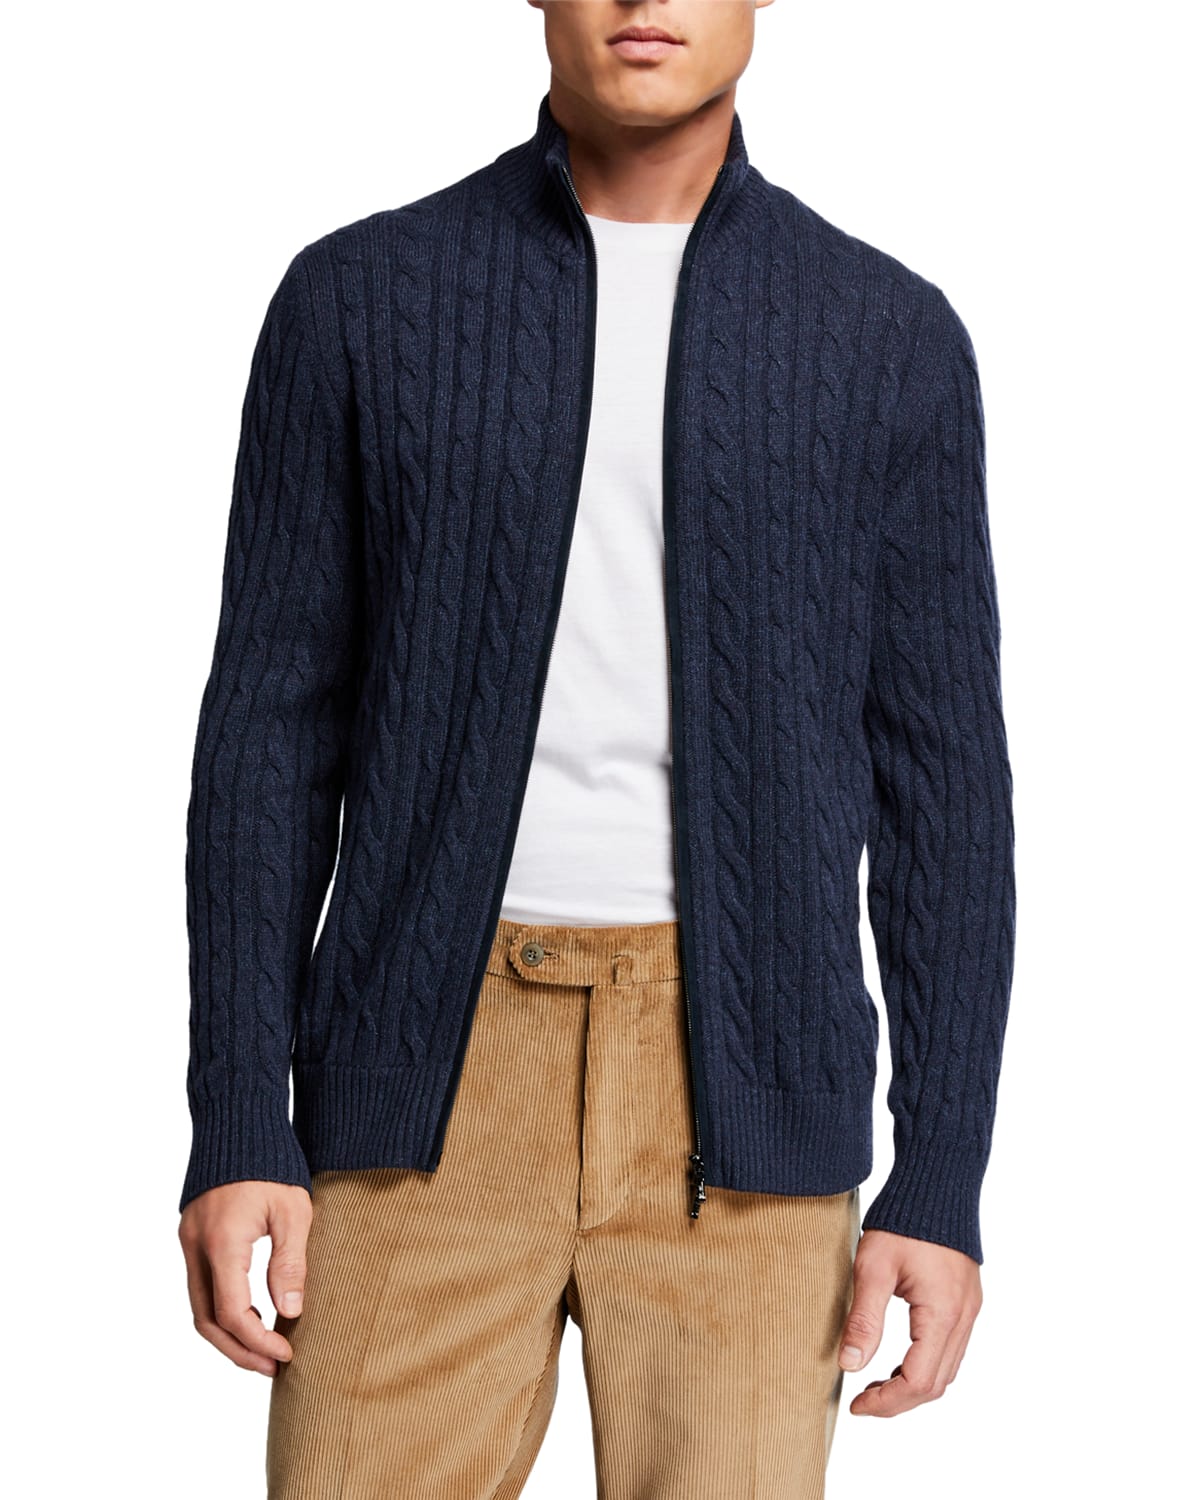 Men's Cable-Knit Cashmere Zip-Front Sweater